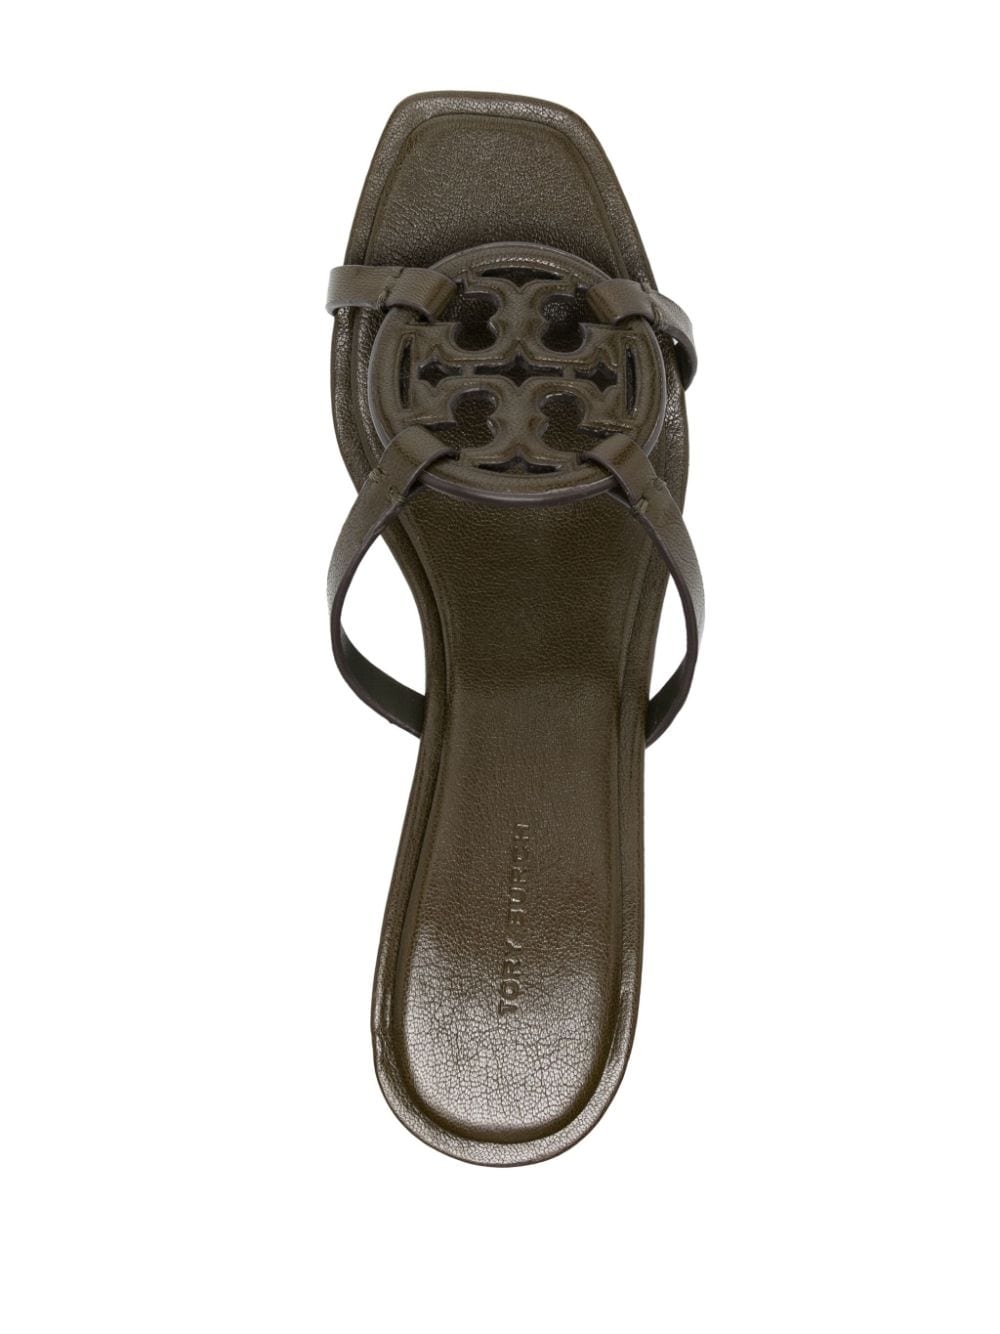 Tory Burch Geo Bombe Miller 55mm leather sandals Green